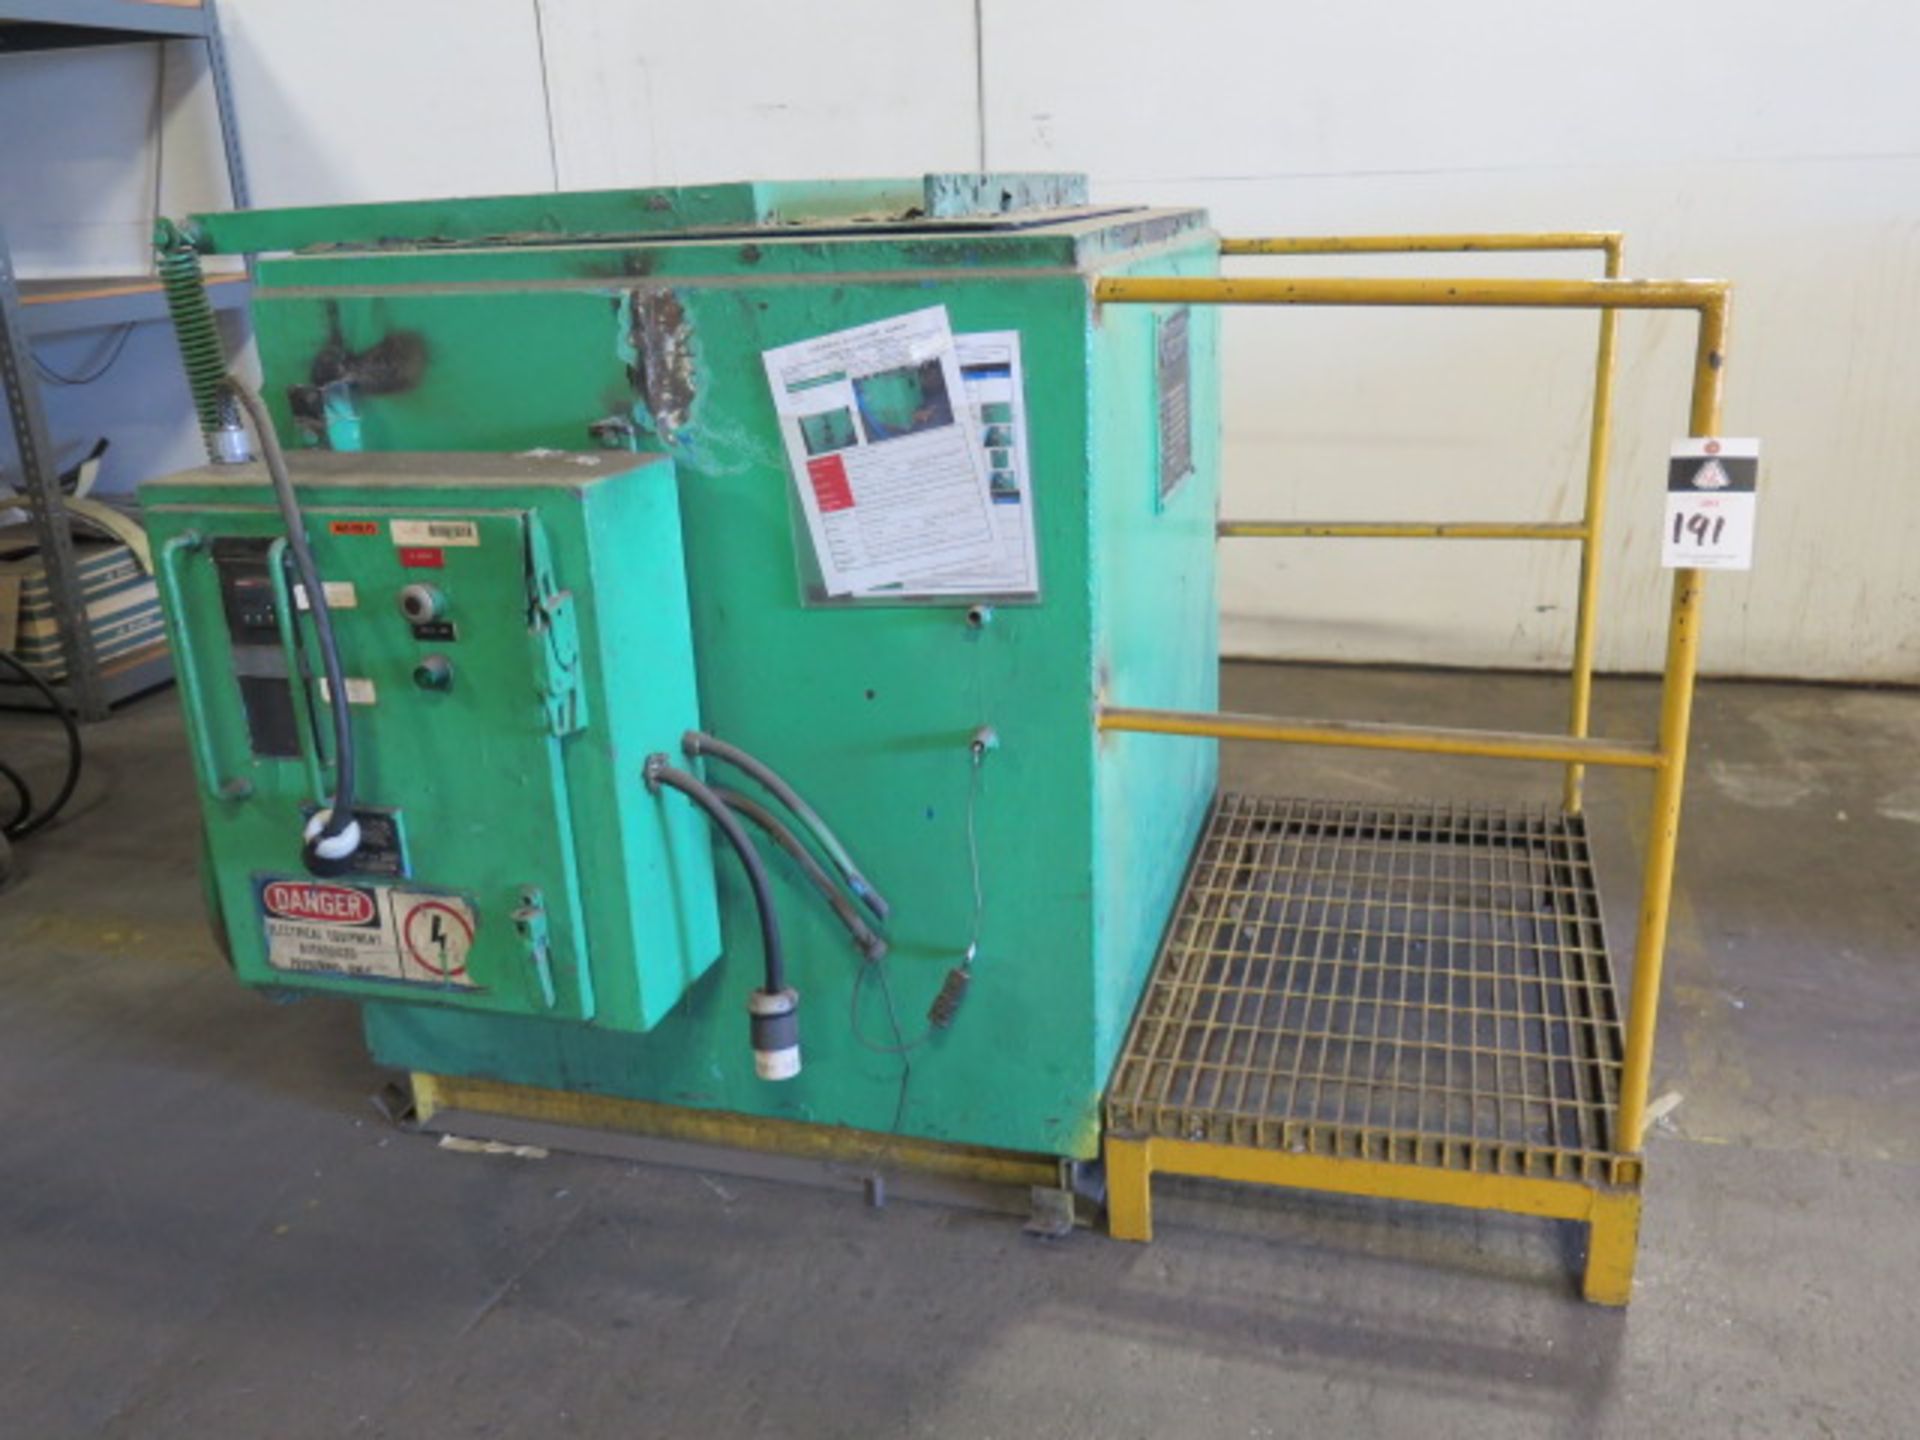 Granco Clark 9kW Non Recirculating Die Oven w/ 30" x 30" x 30" Chamber, 1000 Deg F, 460V, SOLD AS IS